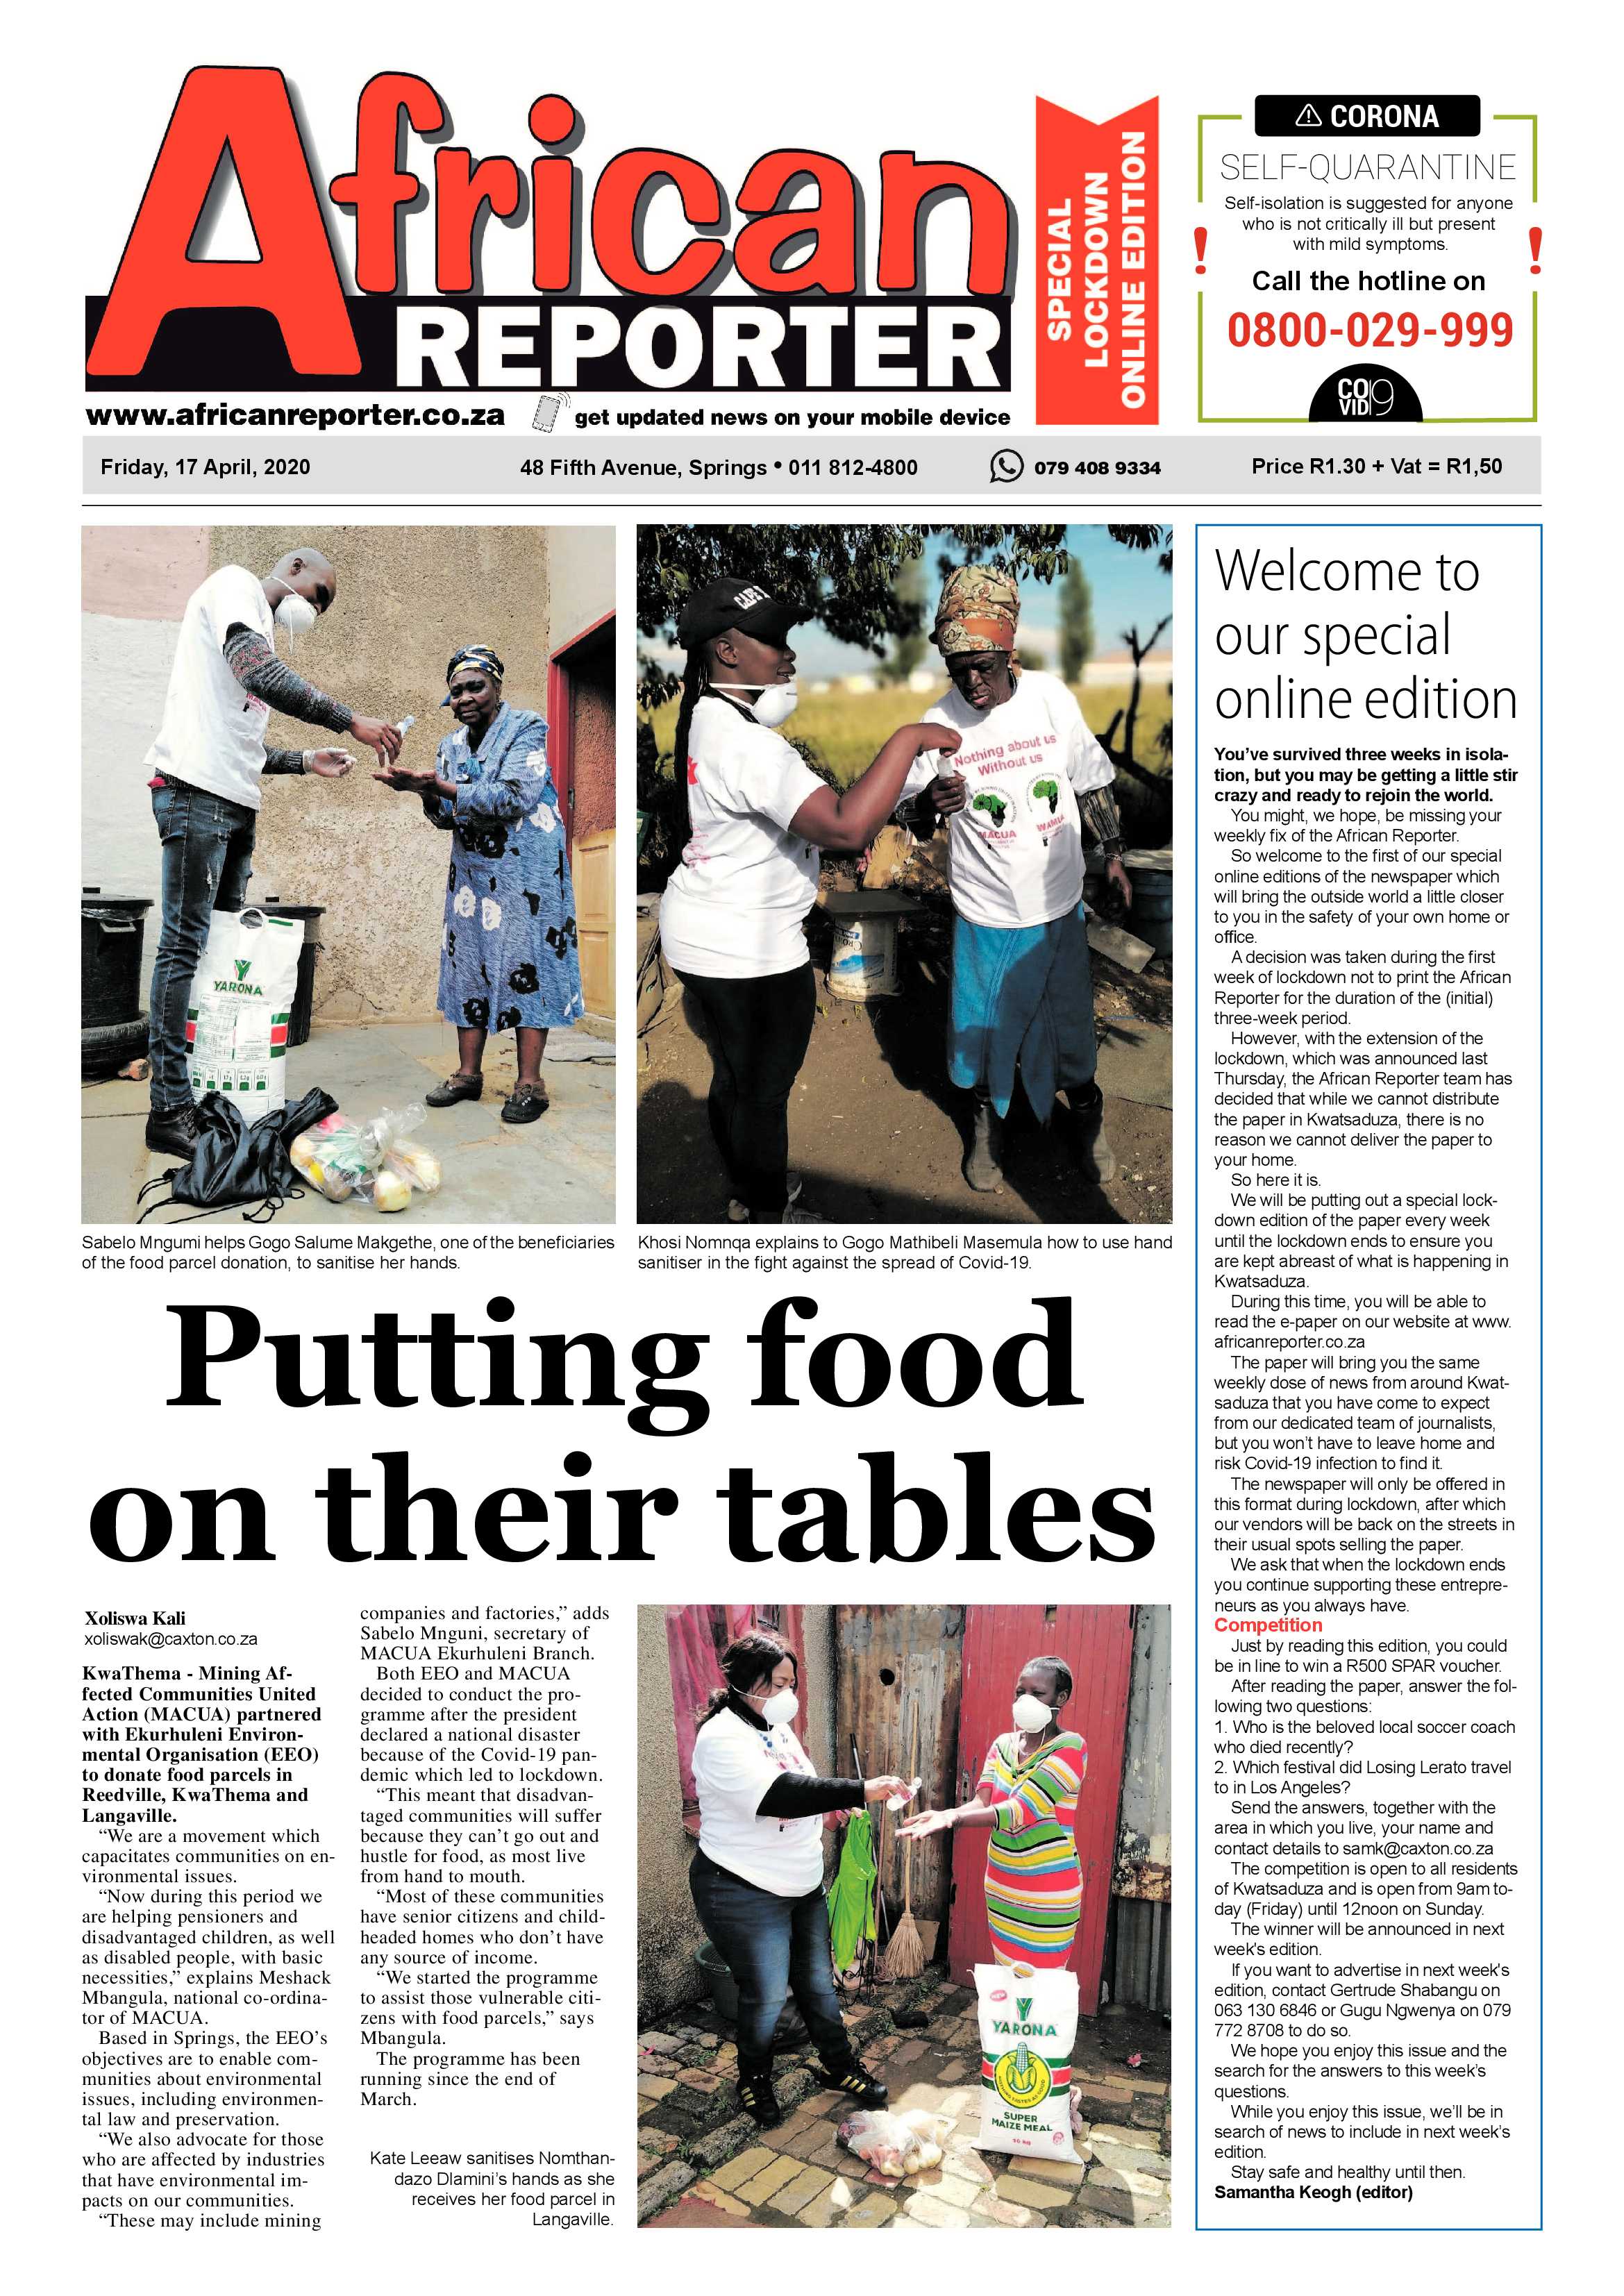 African Reporter- Special Edition page 1